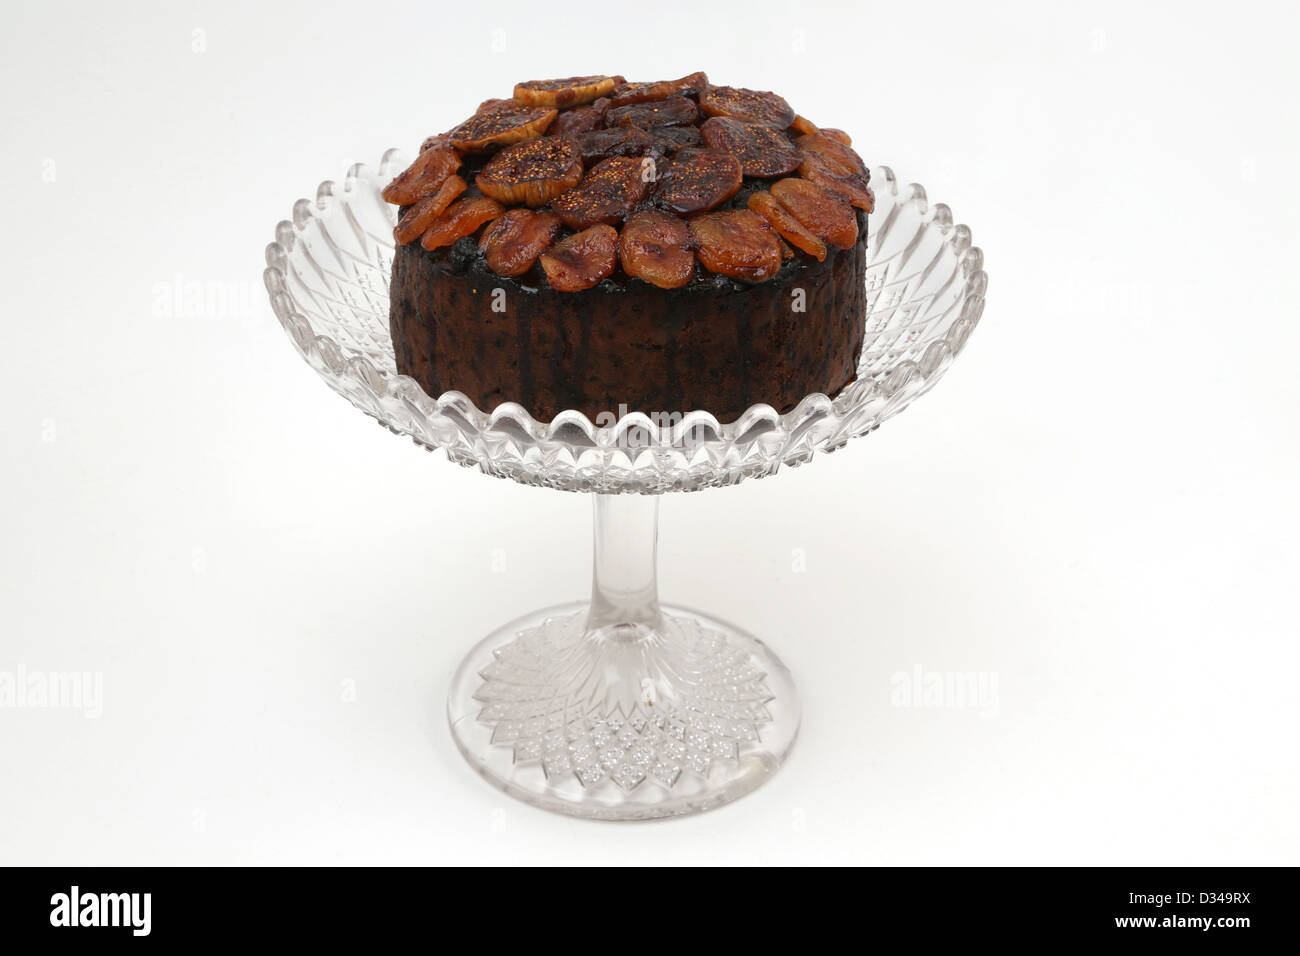 Christmas Fruit Cake With Dried Fruit On Glass Cake Stand Stock Photo